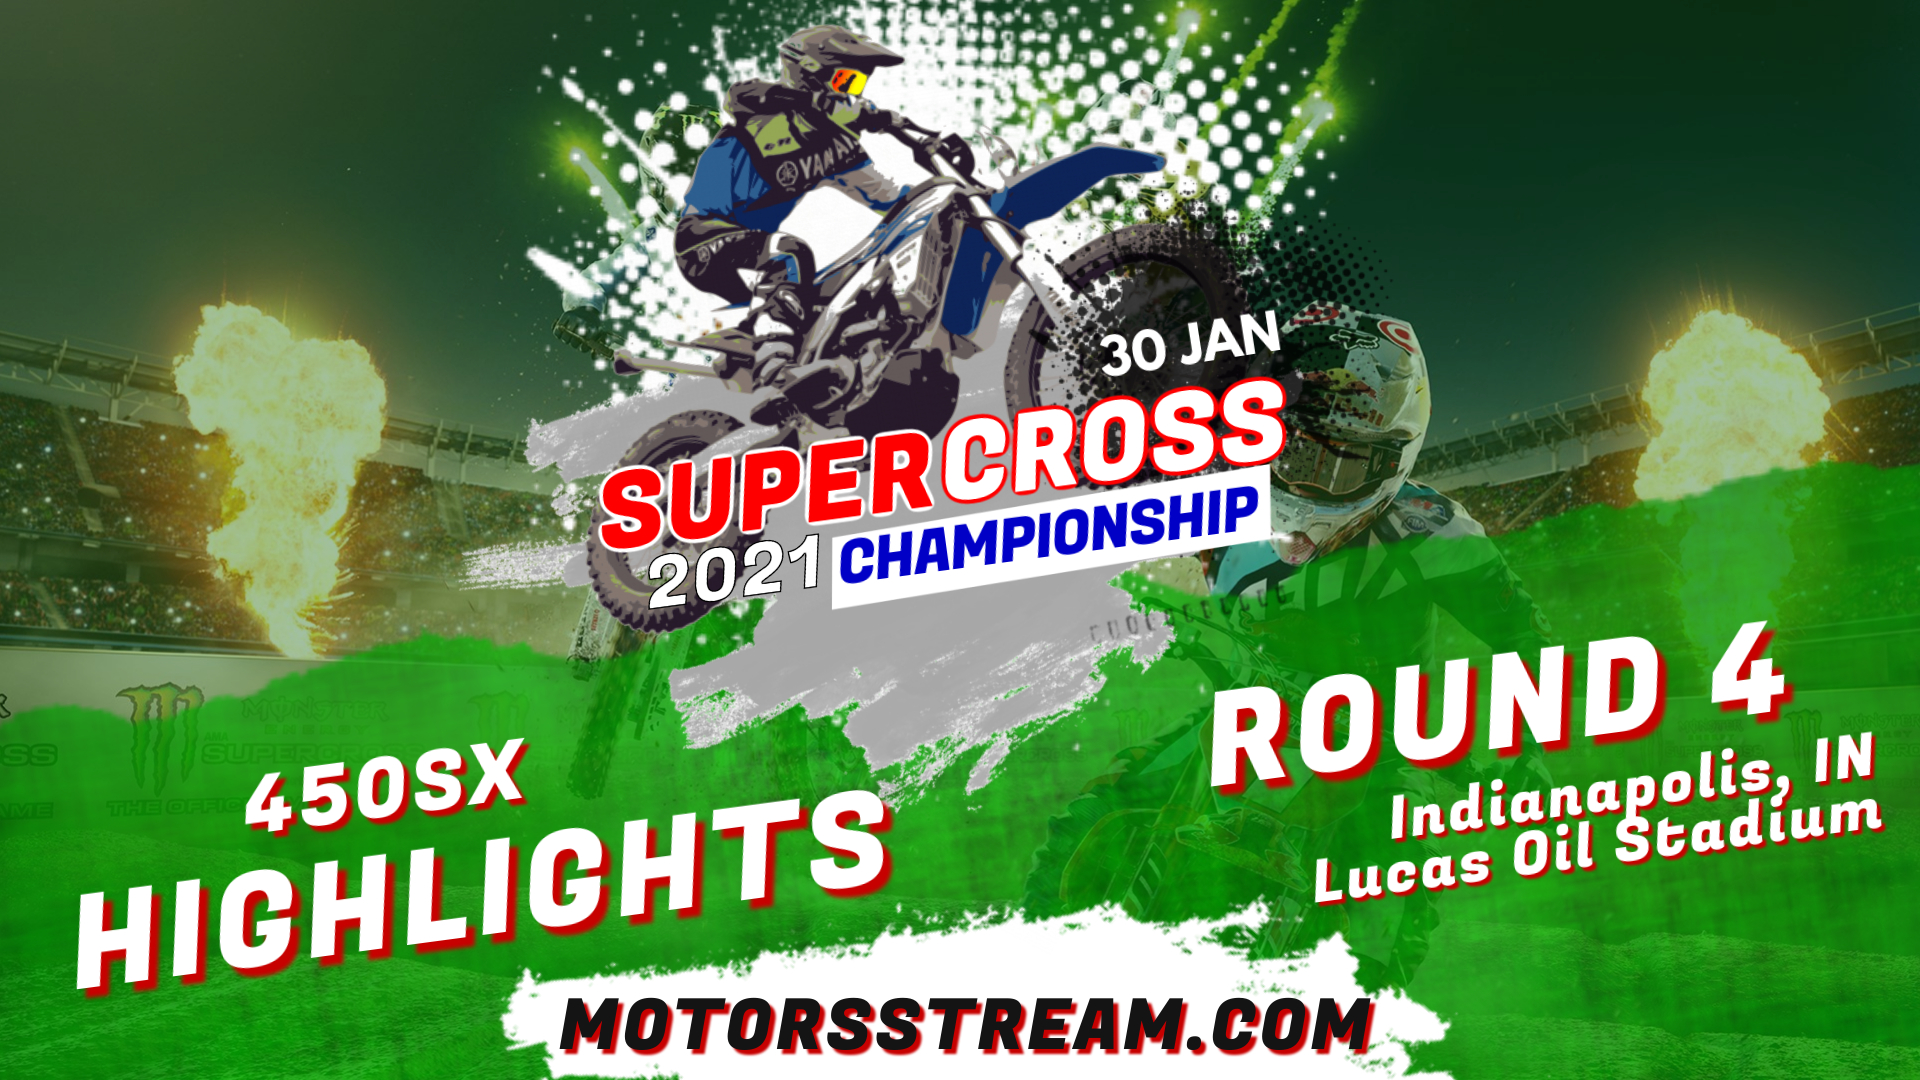 Supercross Round 4 Indianapolis 450SX Highlights 2021